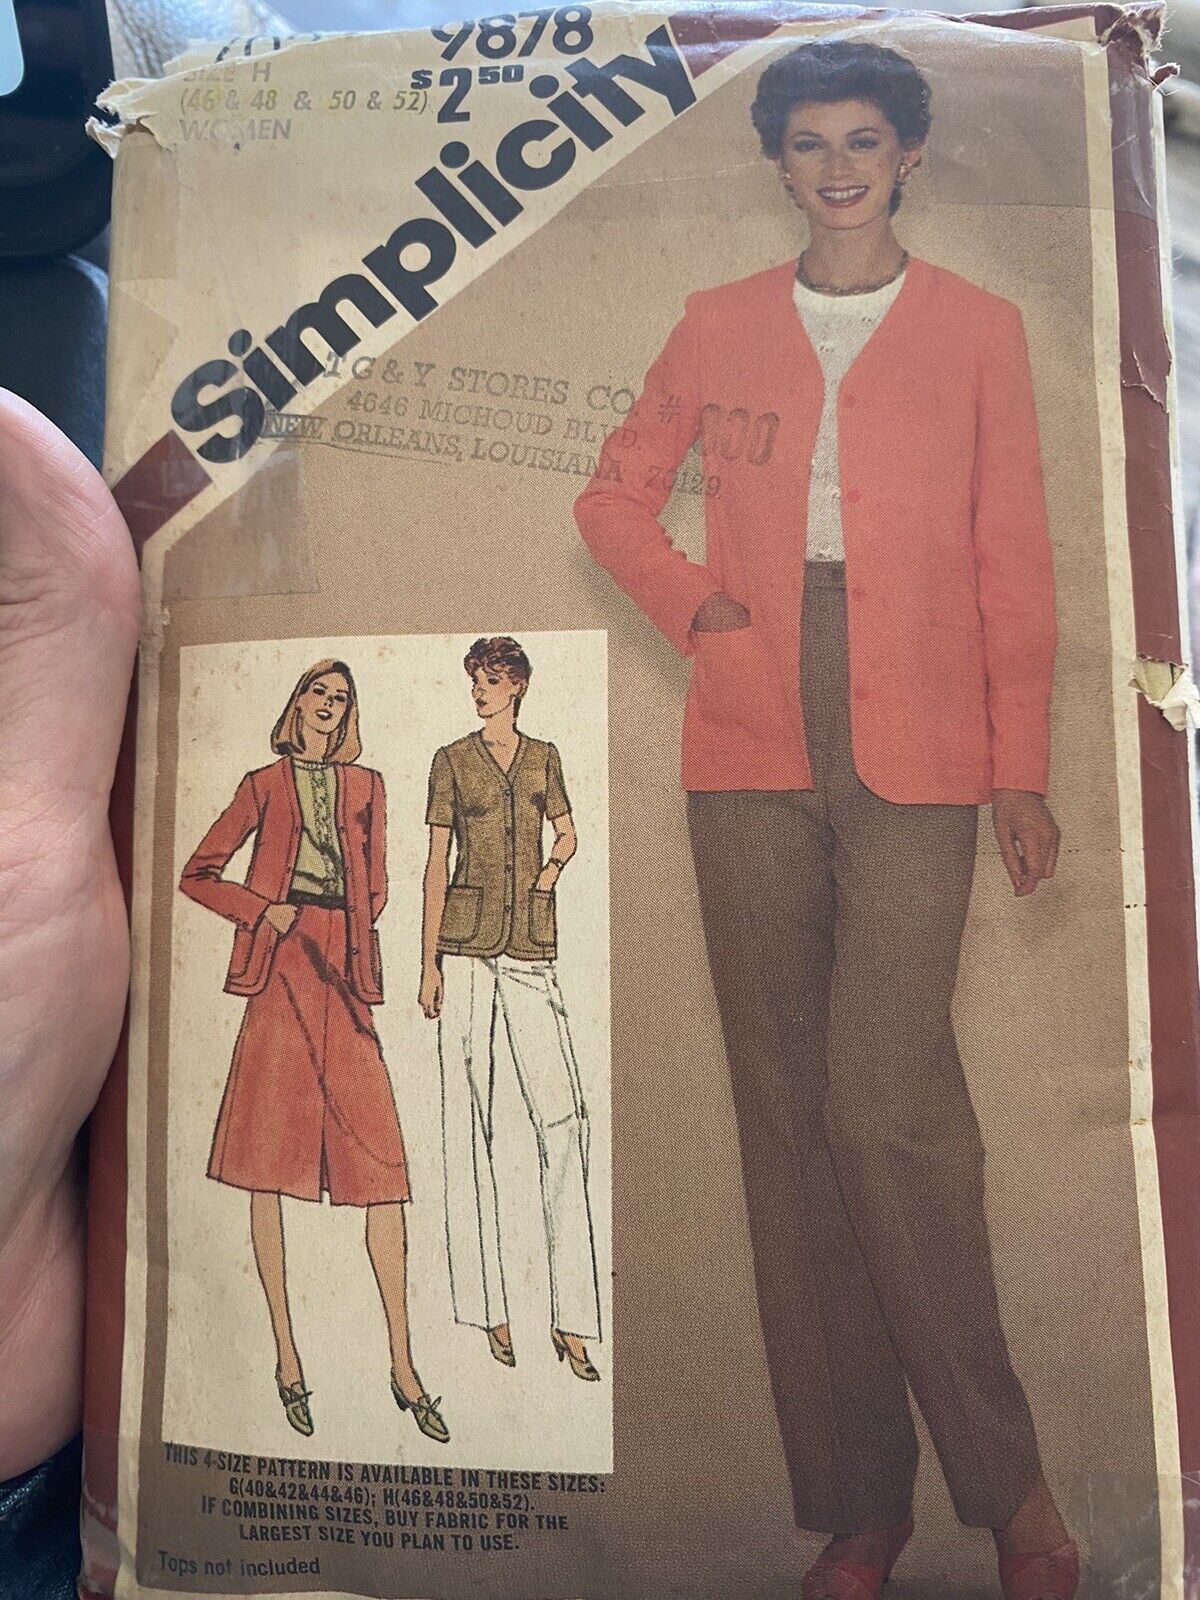 Vintage Simplicity Career Suit Sewing Pattern 9878 Size 46-52 Cut and Complete 